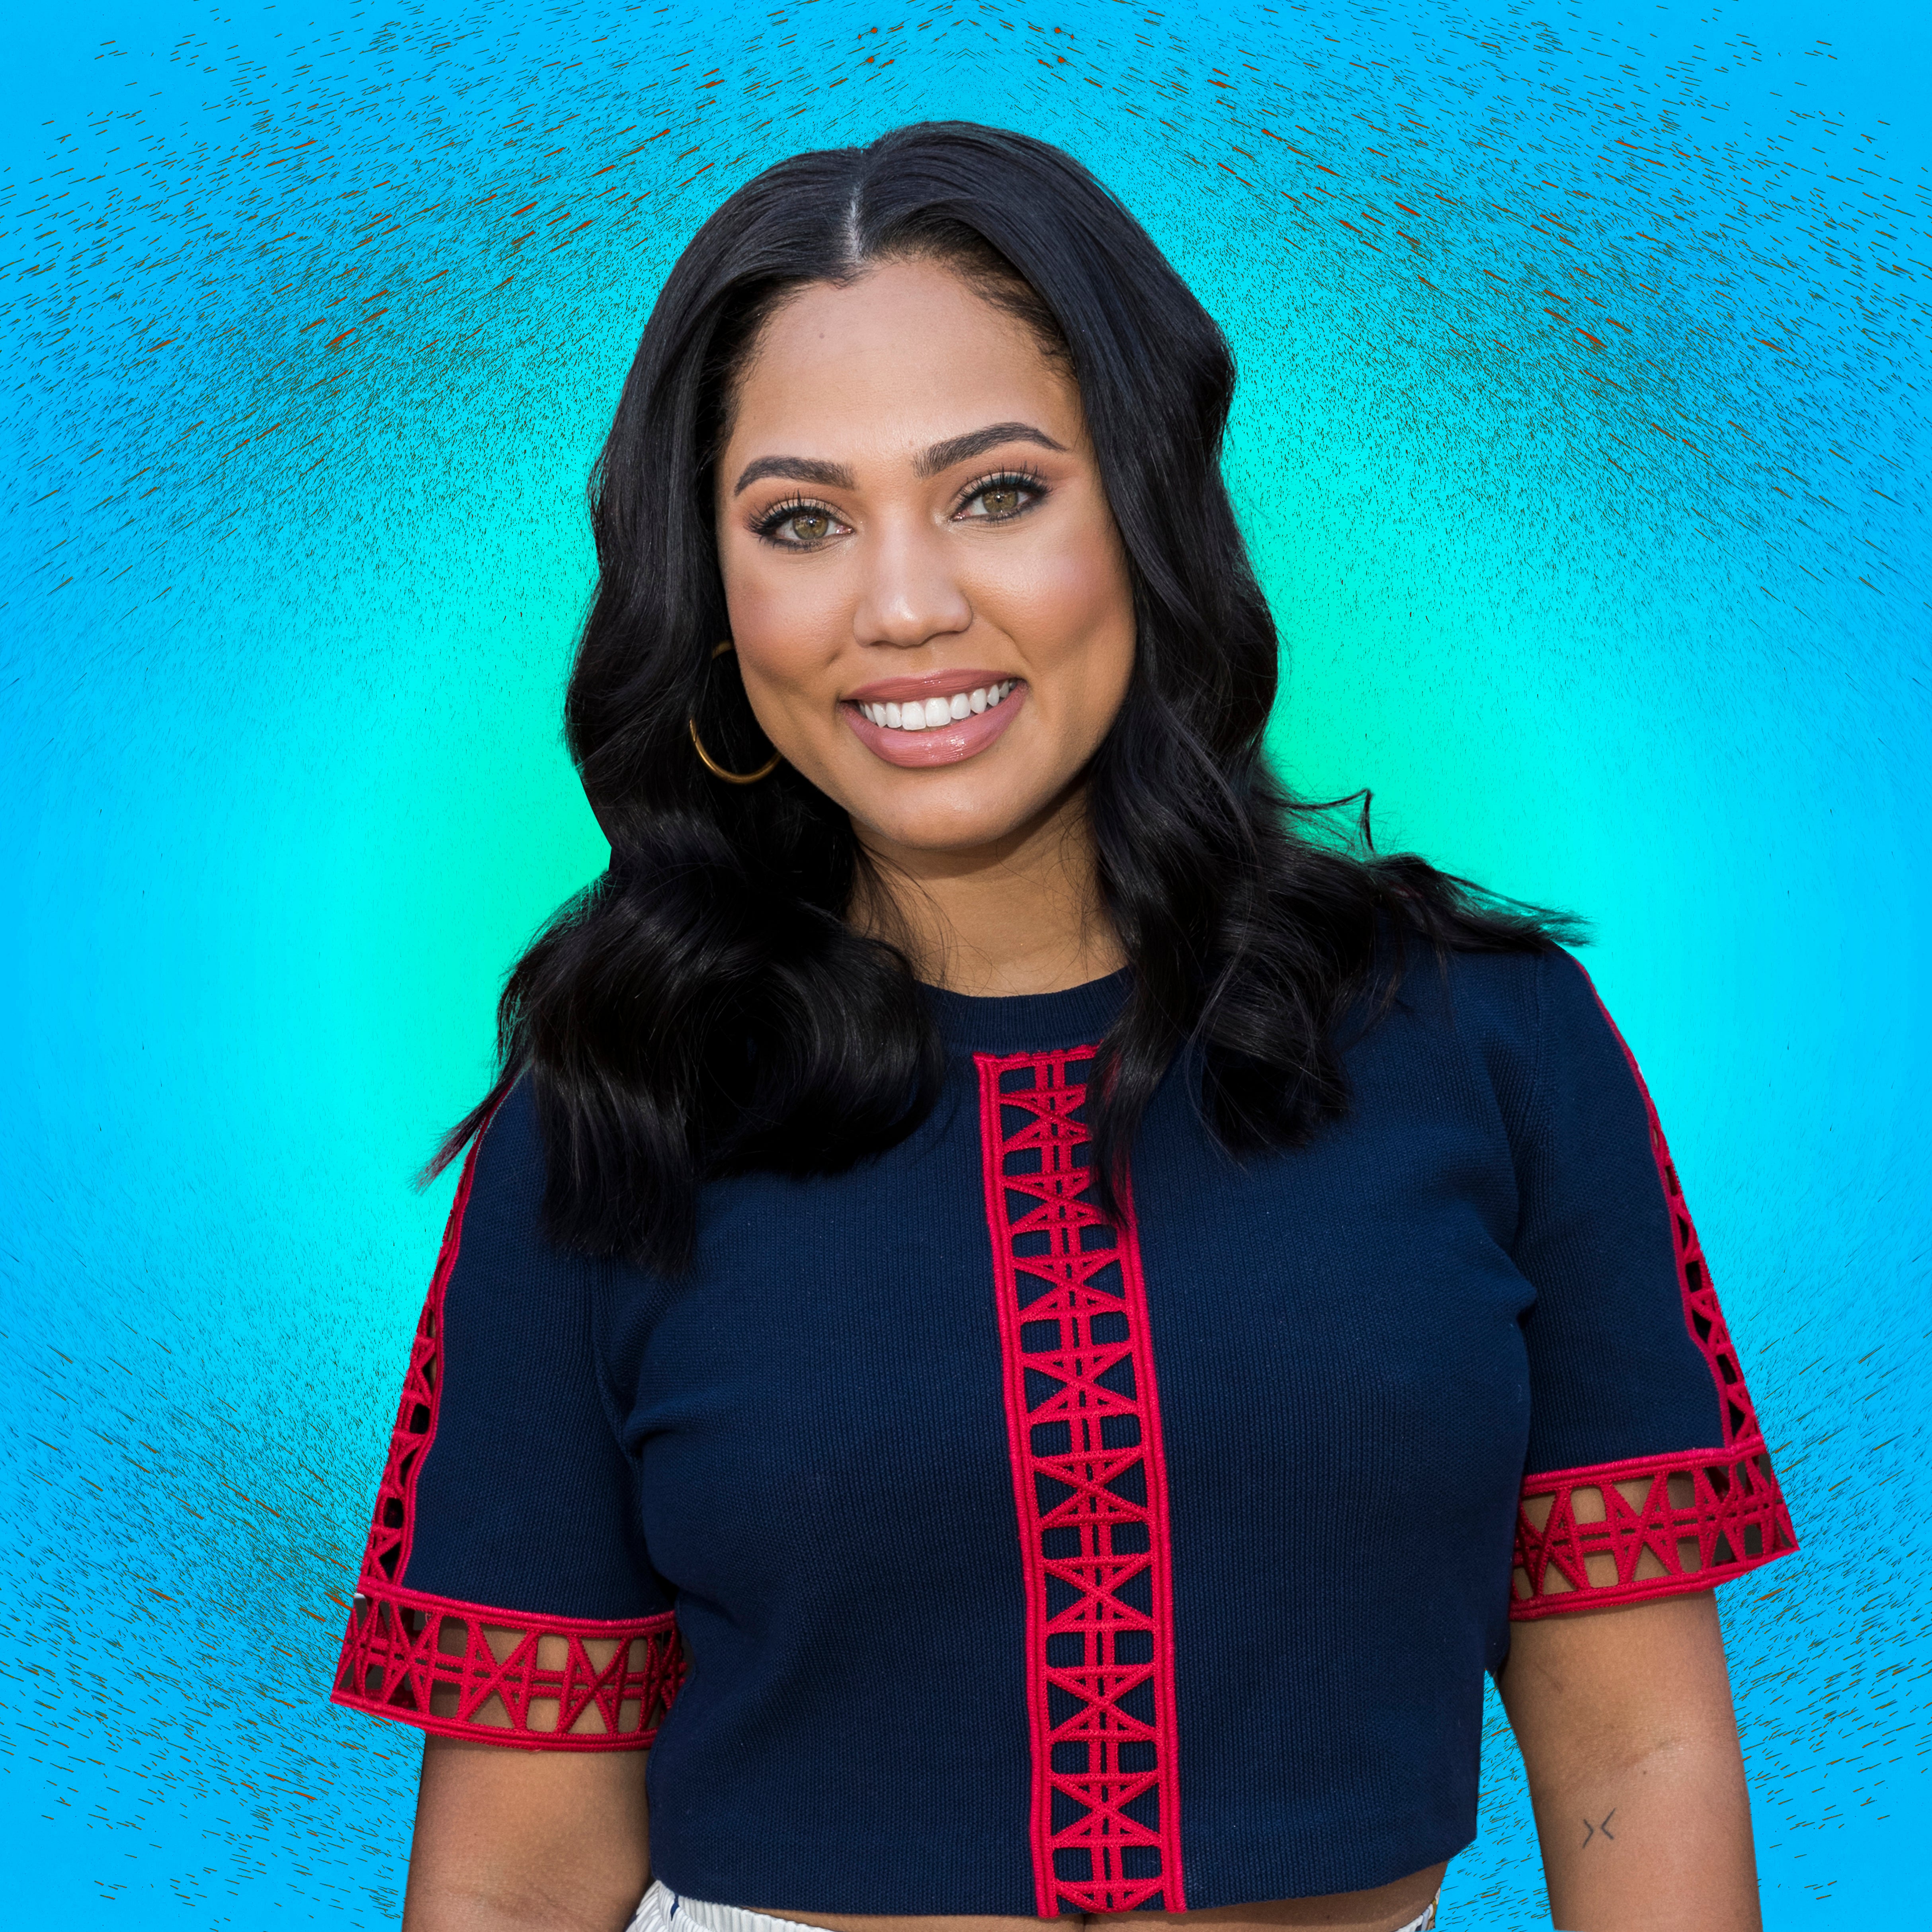 Our Favorite Christmas Gift Finds From Ayesha Curry's Lifestyle Empire
